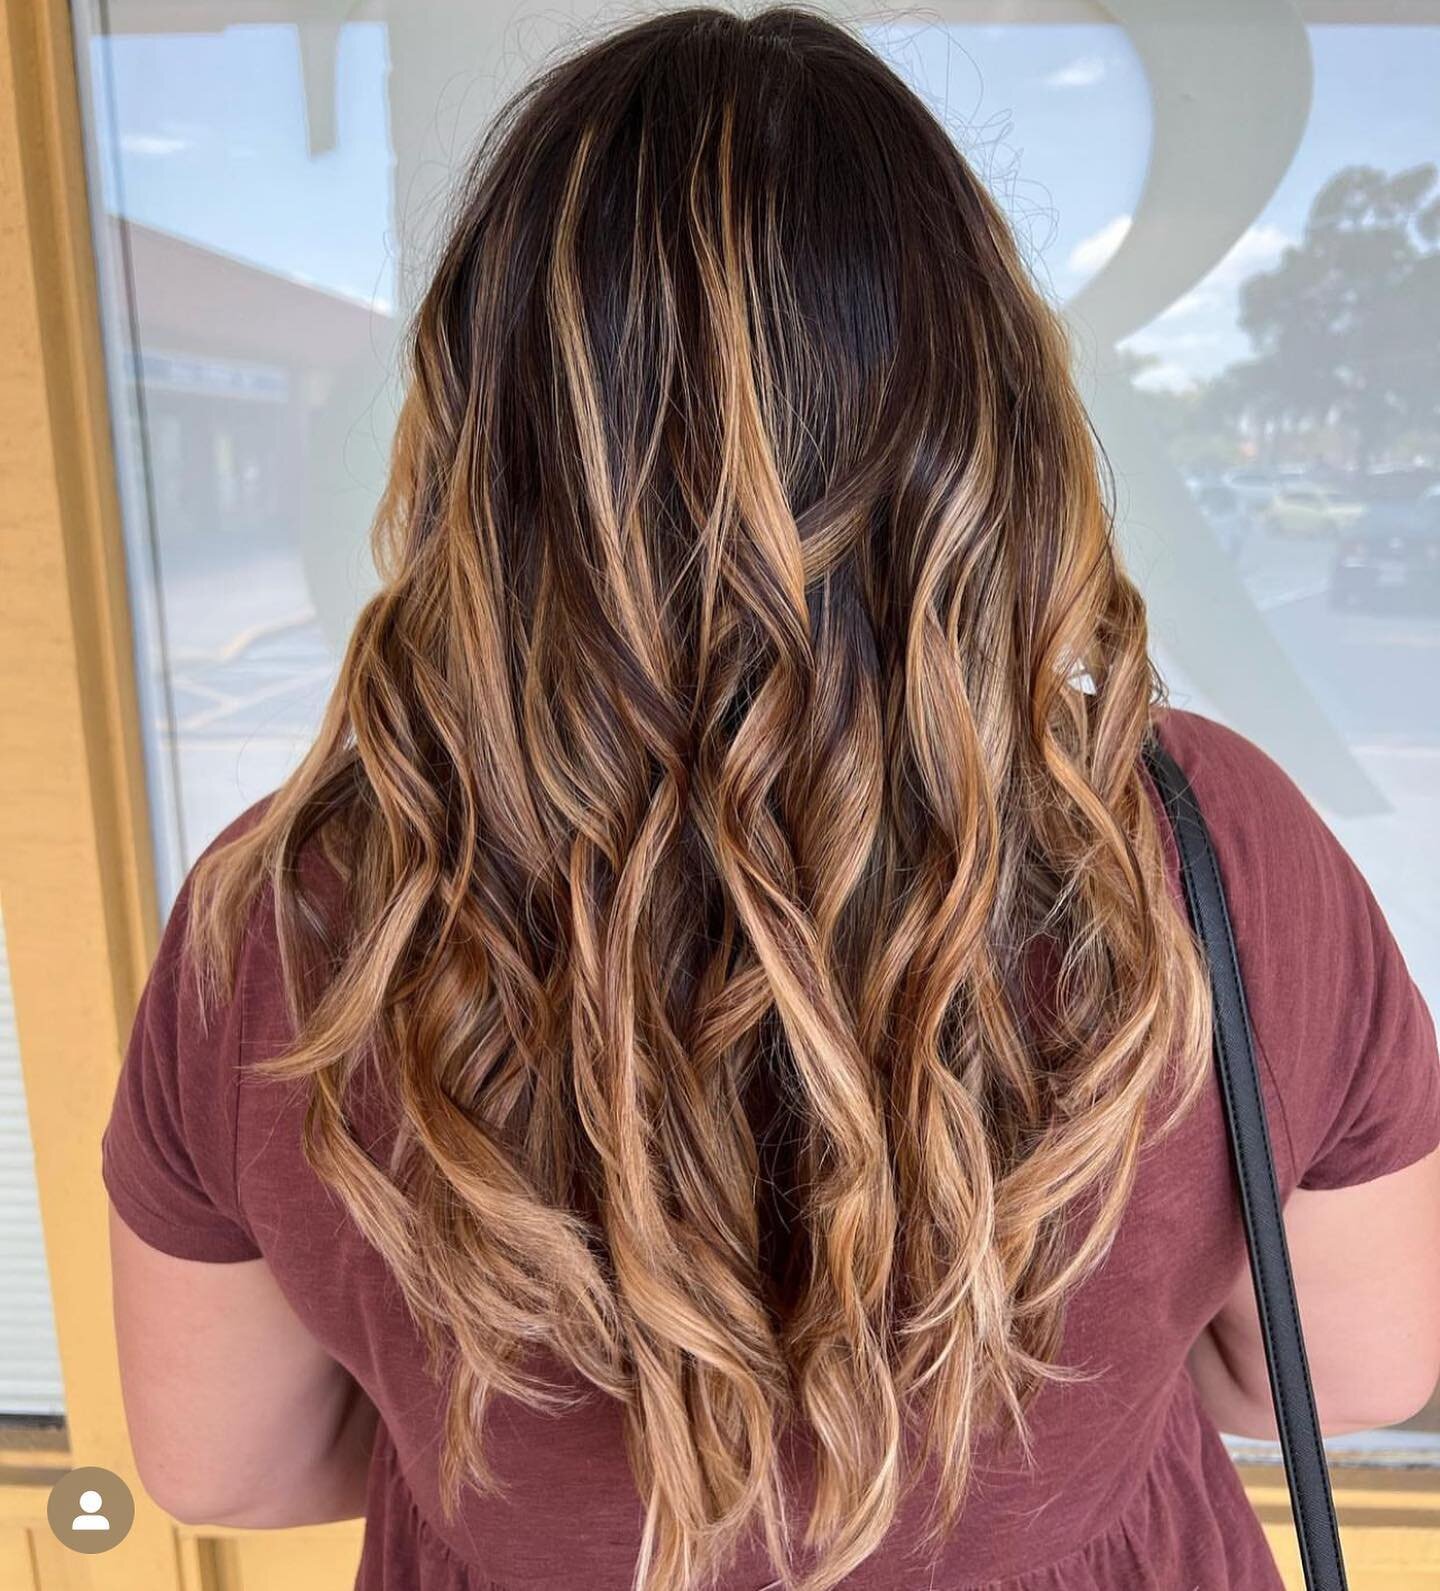 Artist - Corinna @cmyersbeauty 

Brought up this beauty&rsquo;s #highlights for a glowing refreshed look 👀 

#hair #hairstyles #haircut #haircolor #hairstylist #hairtransformation #hairfashion #hairgoals #hairideas #balayage #balayagehighlights #sar